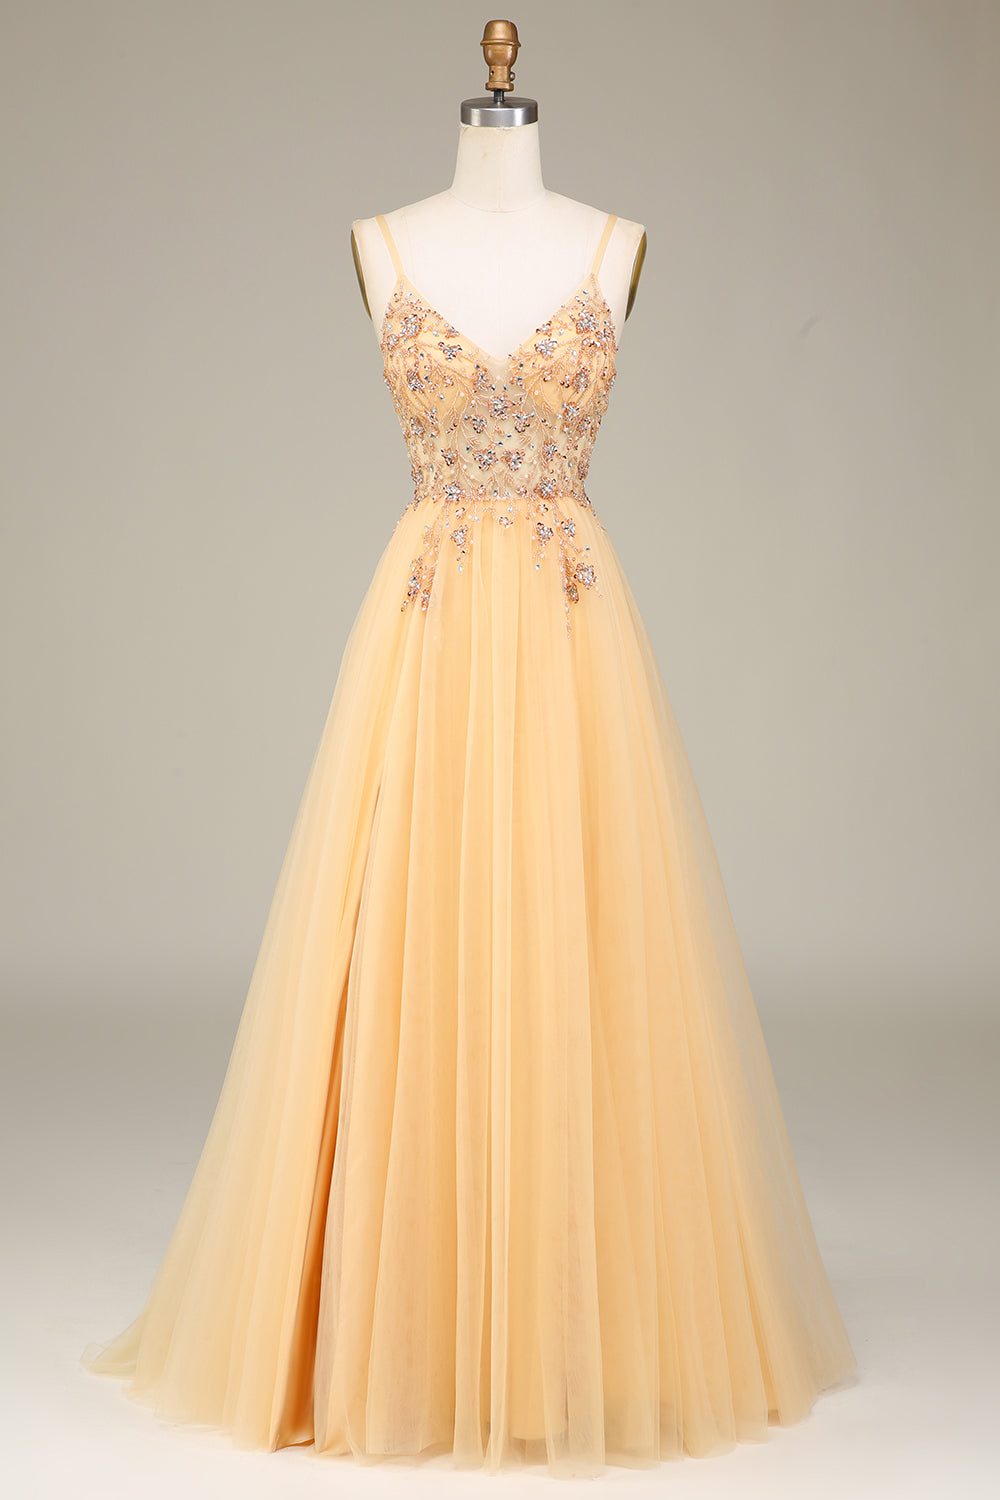 Charming Golden A Line Spaghetti Straps Long Prom Dress with Beading